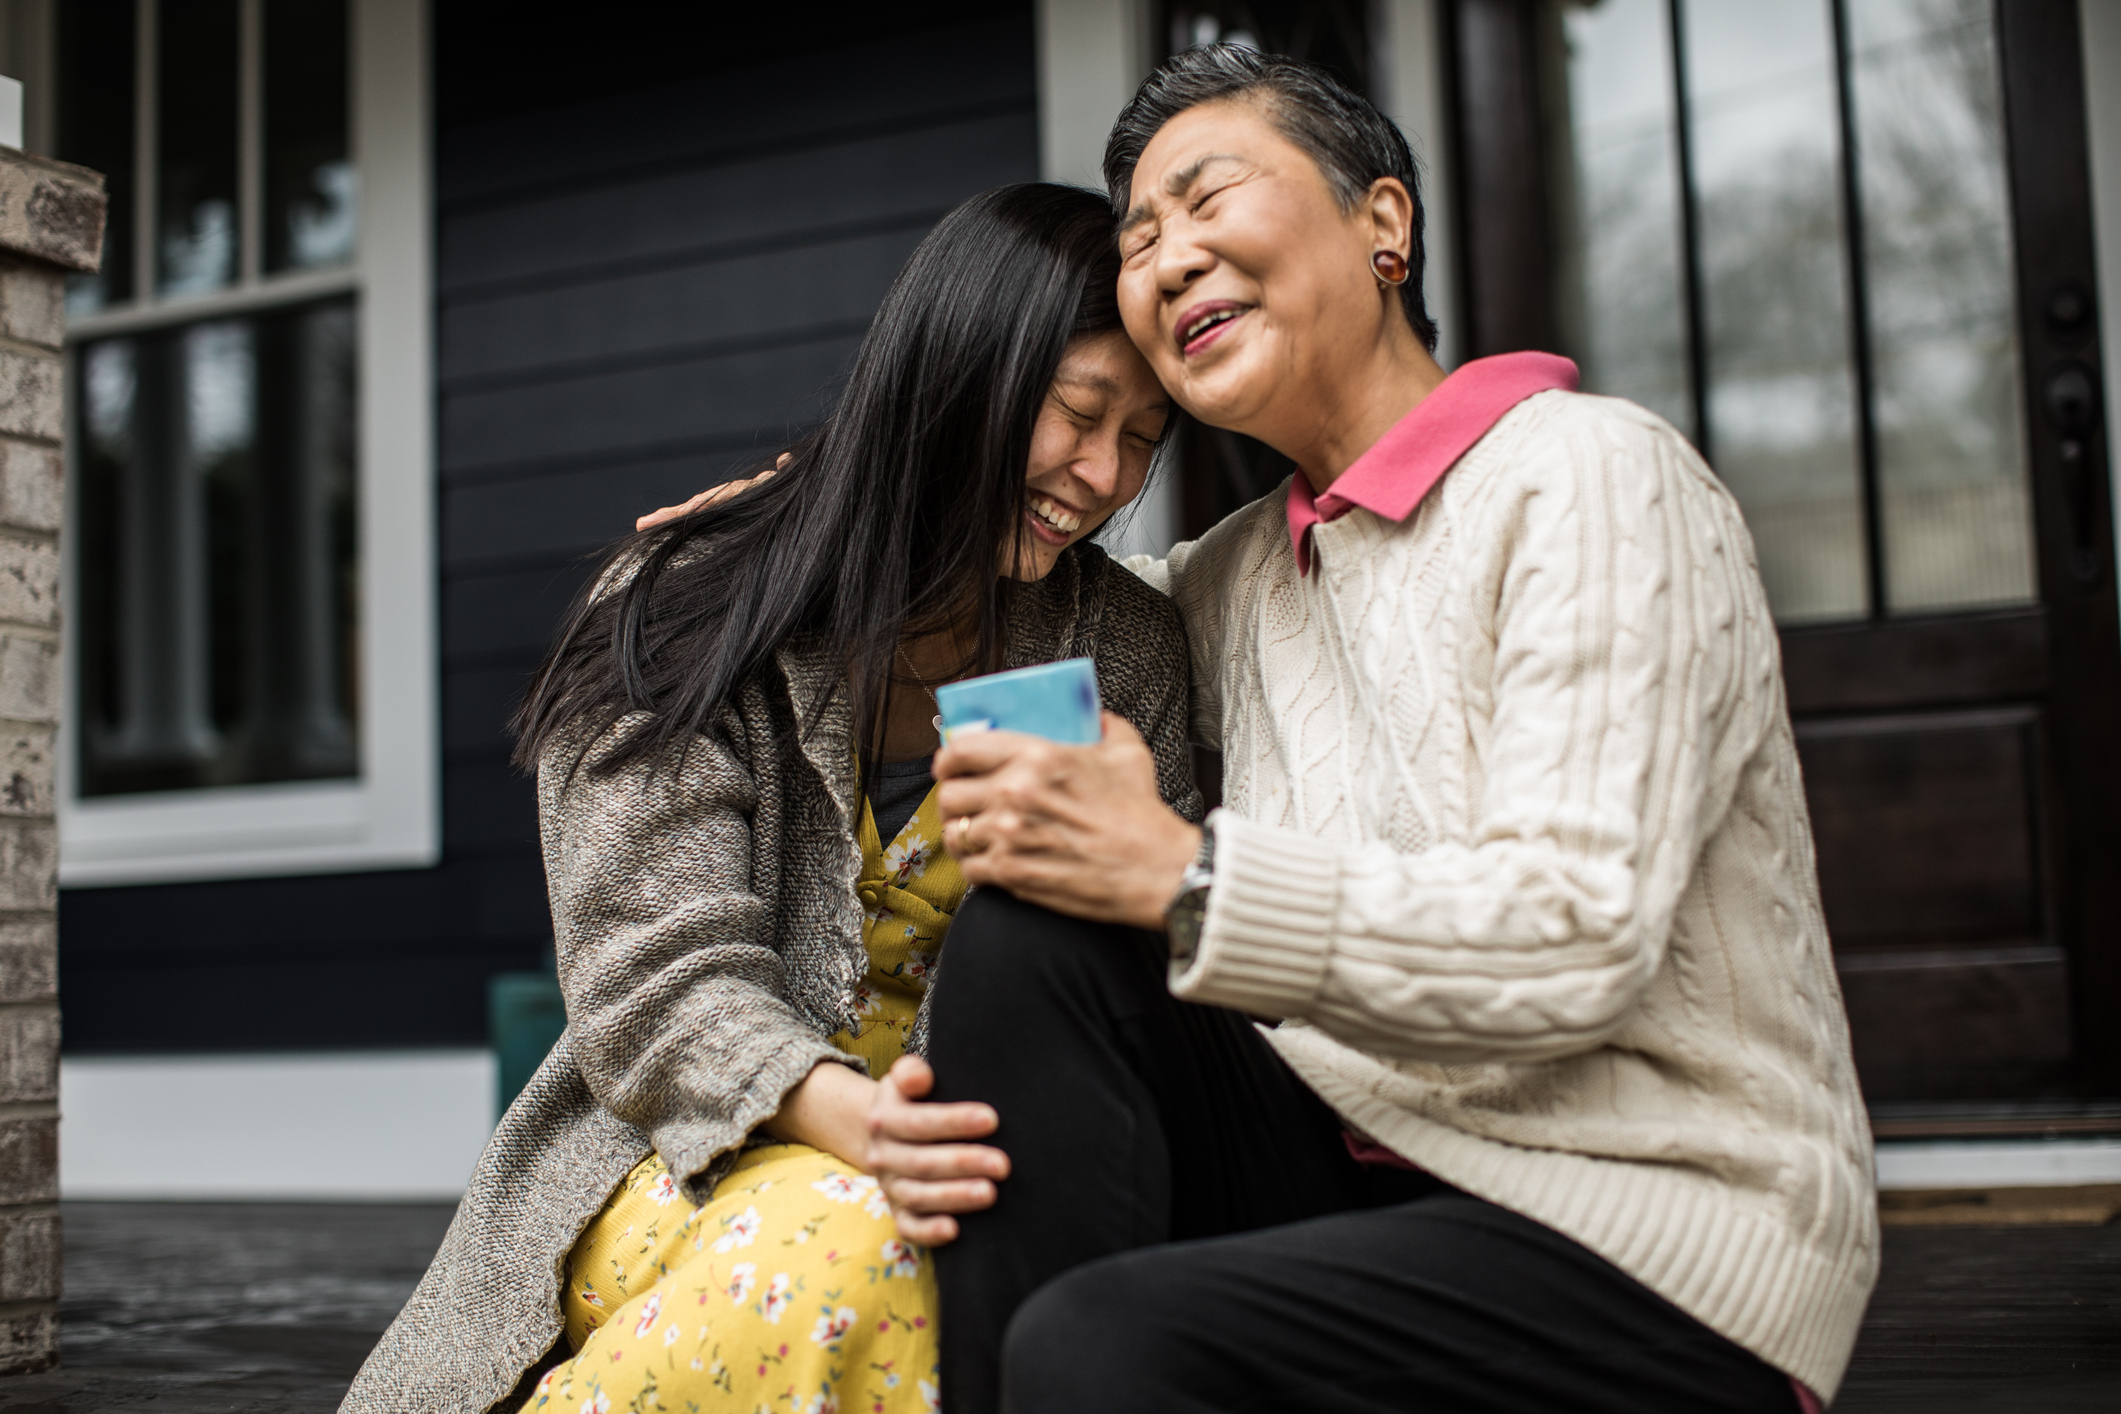 Two people smiling and embracing while sitting on a porch step, one holding a smartphone